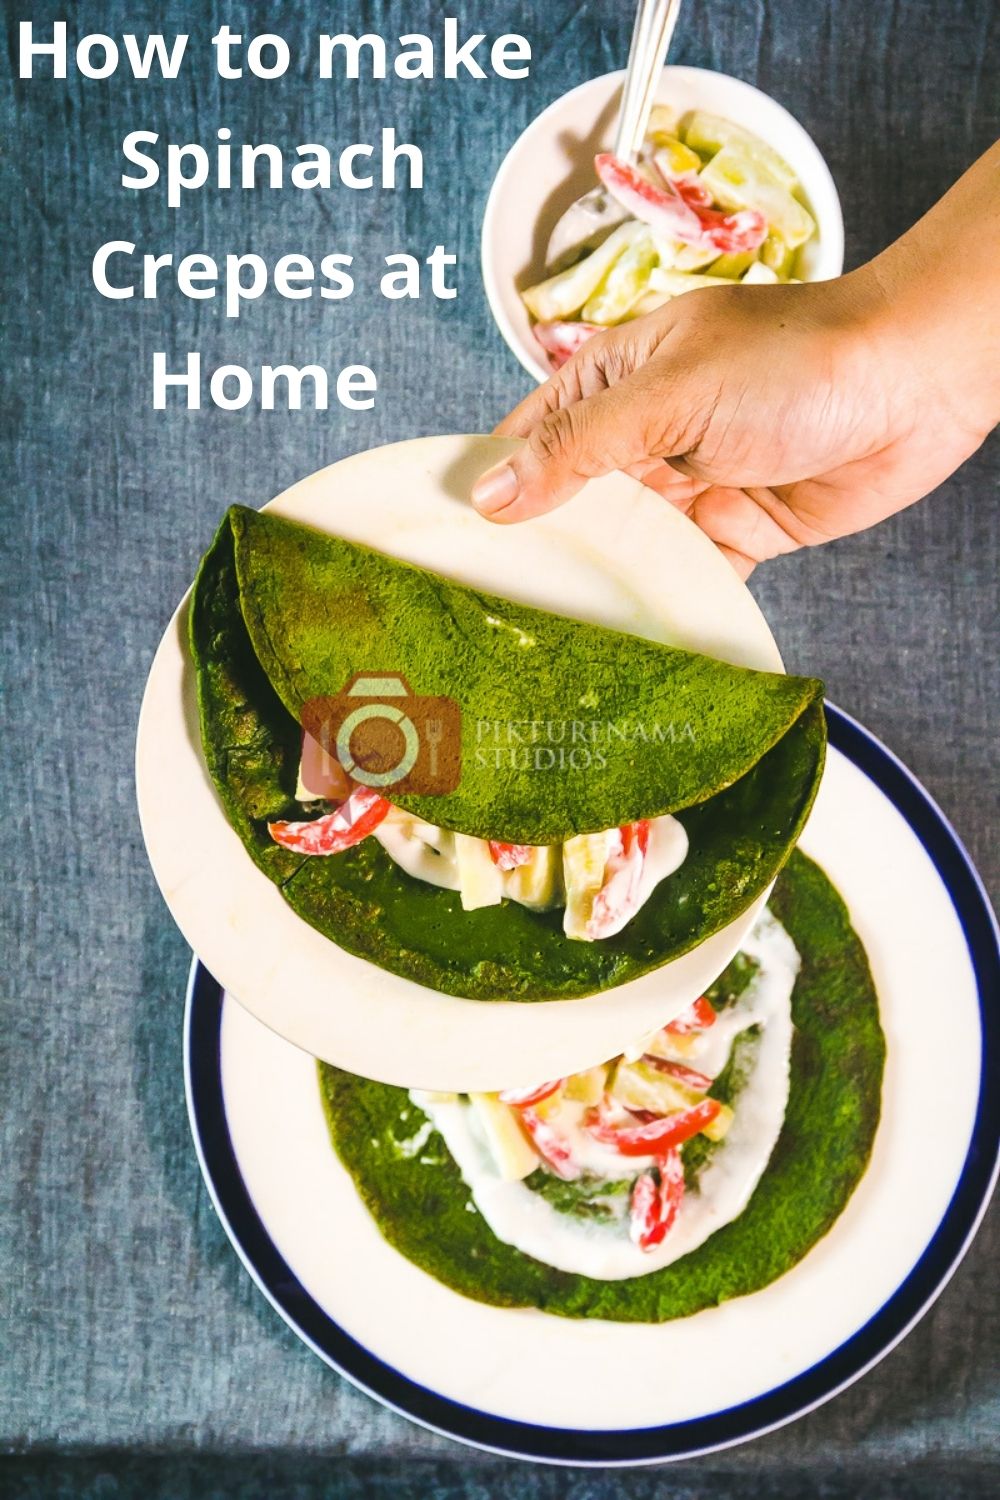 Easy way to make Spinach Crepes at home - 2